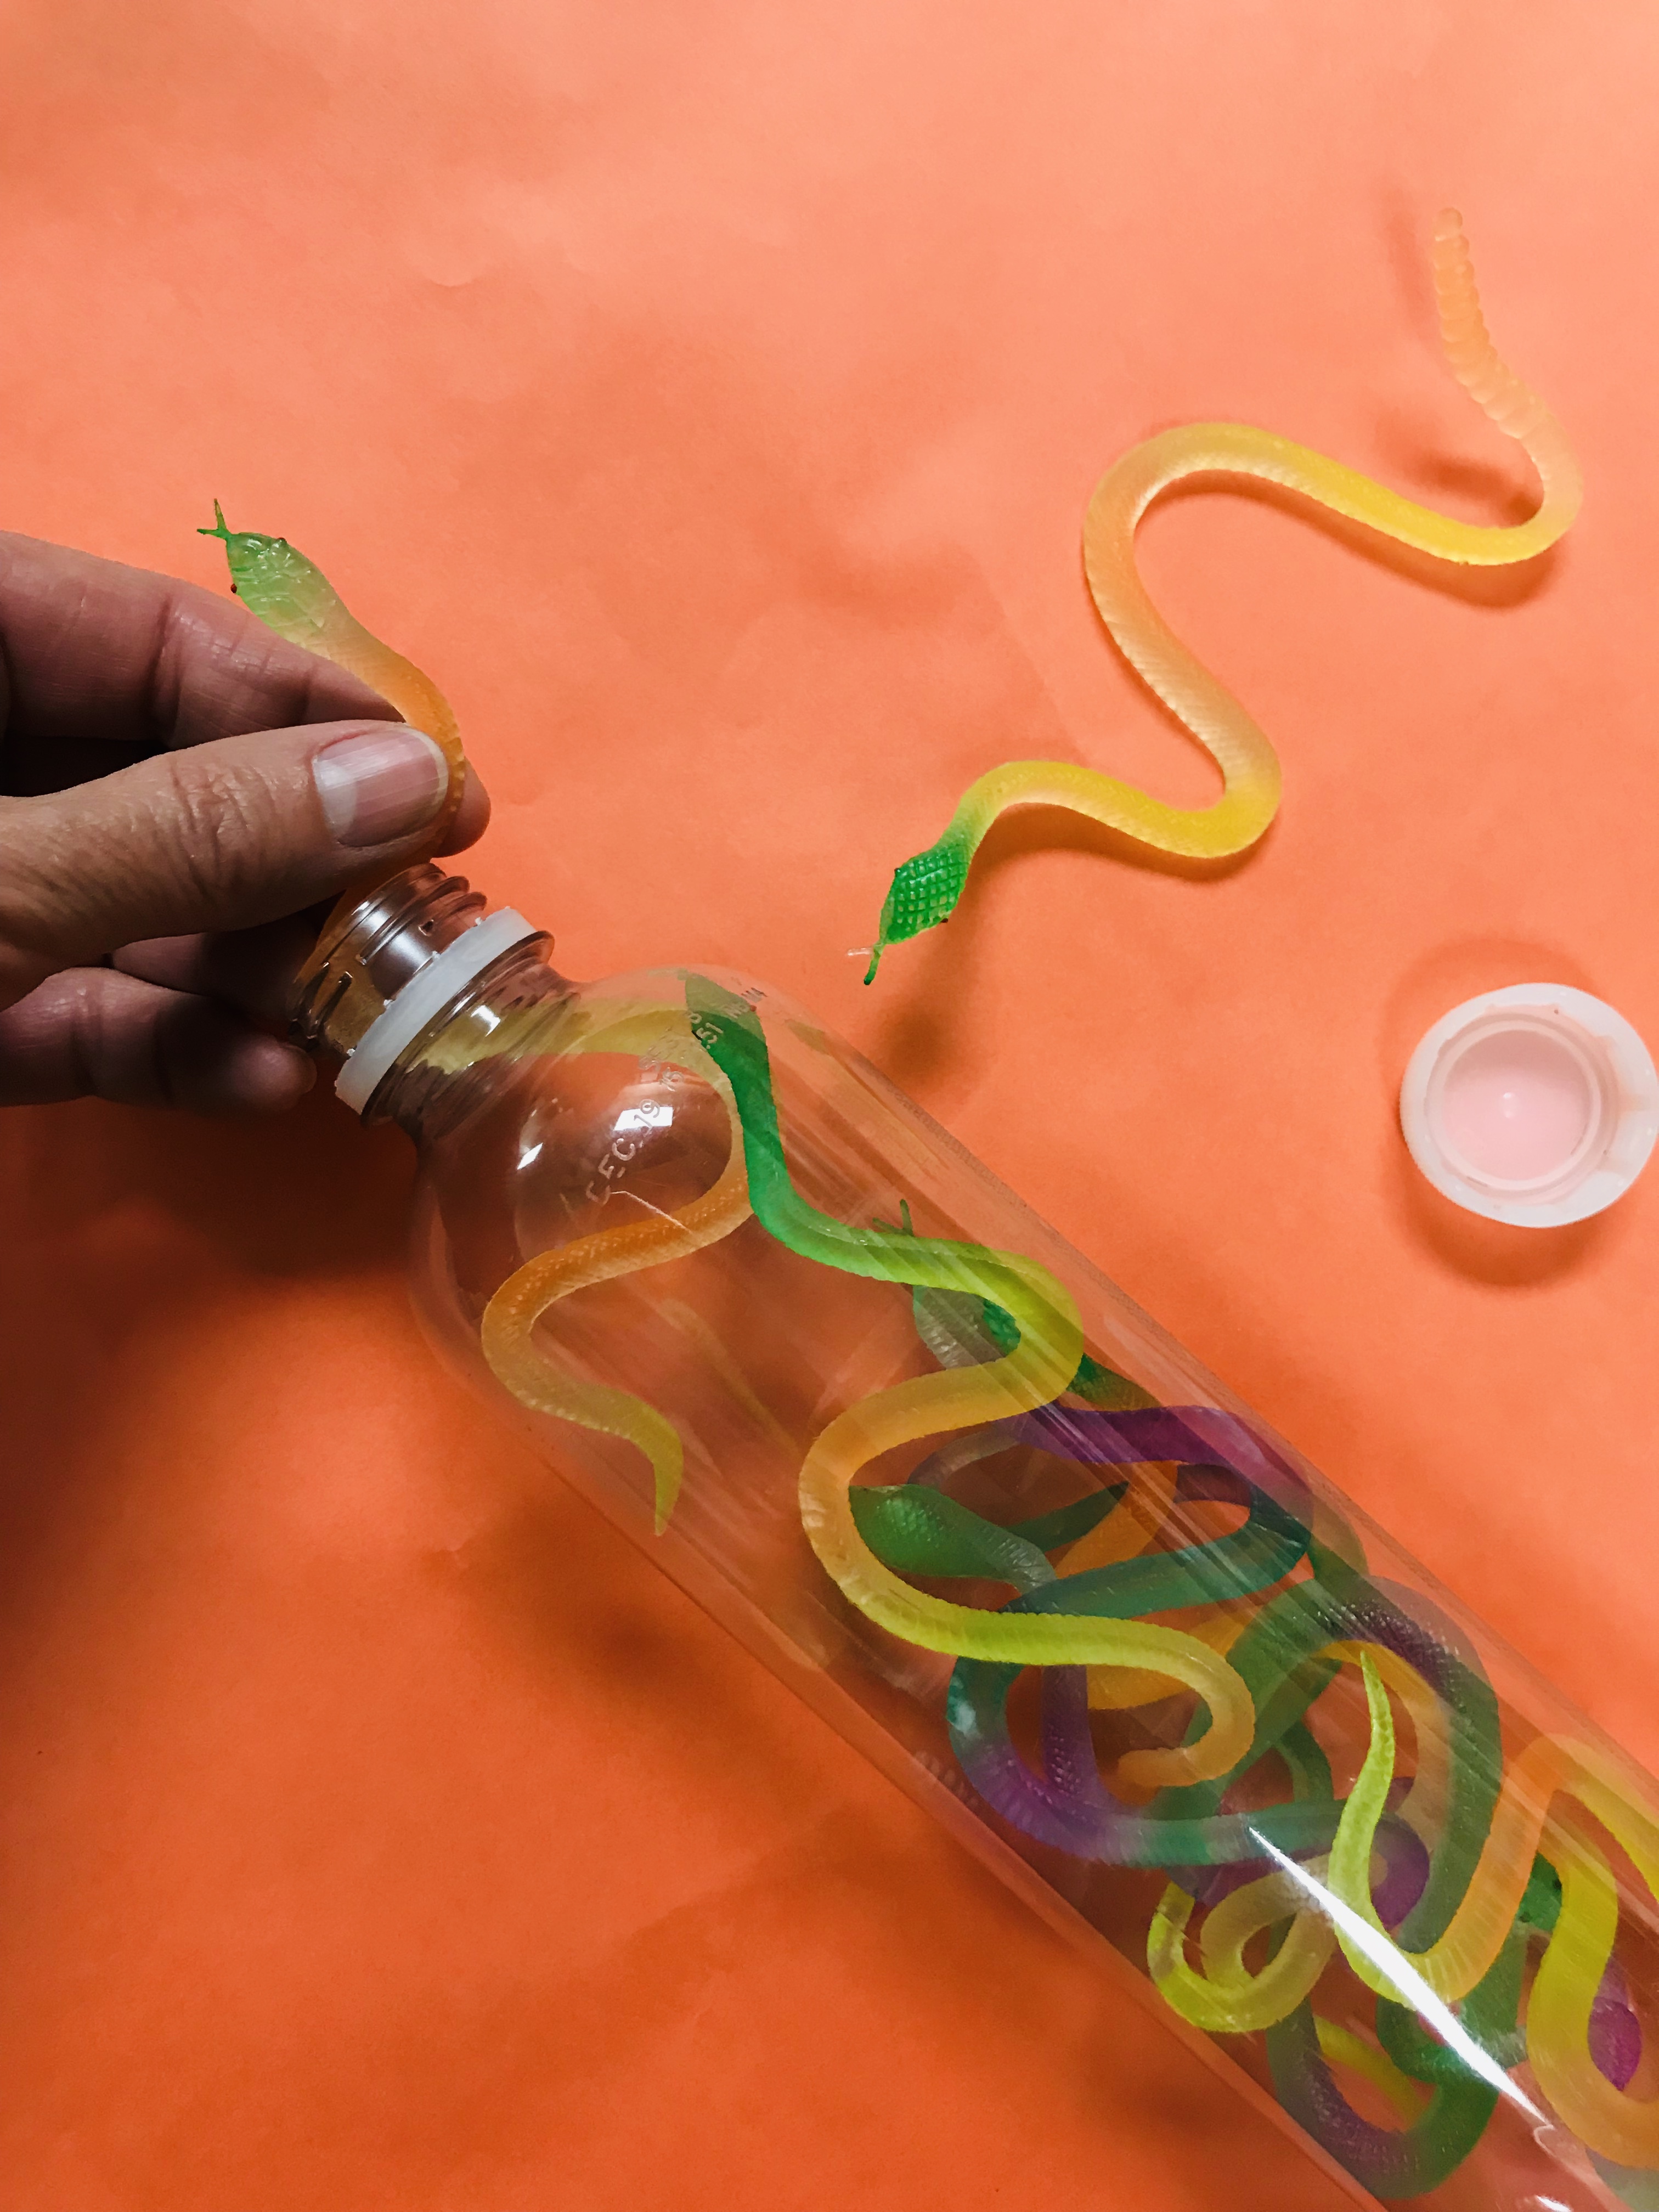 Toy snakes in a bottle